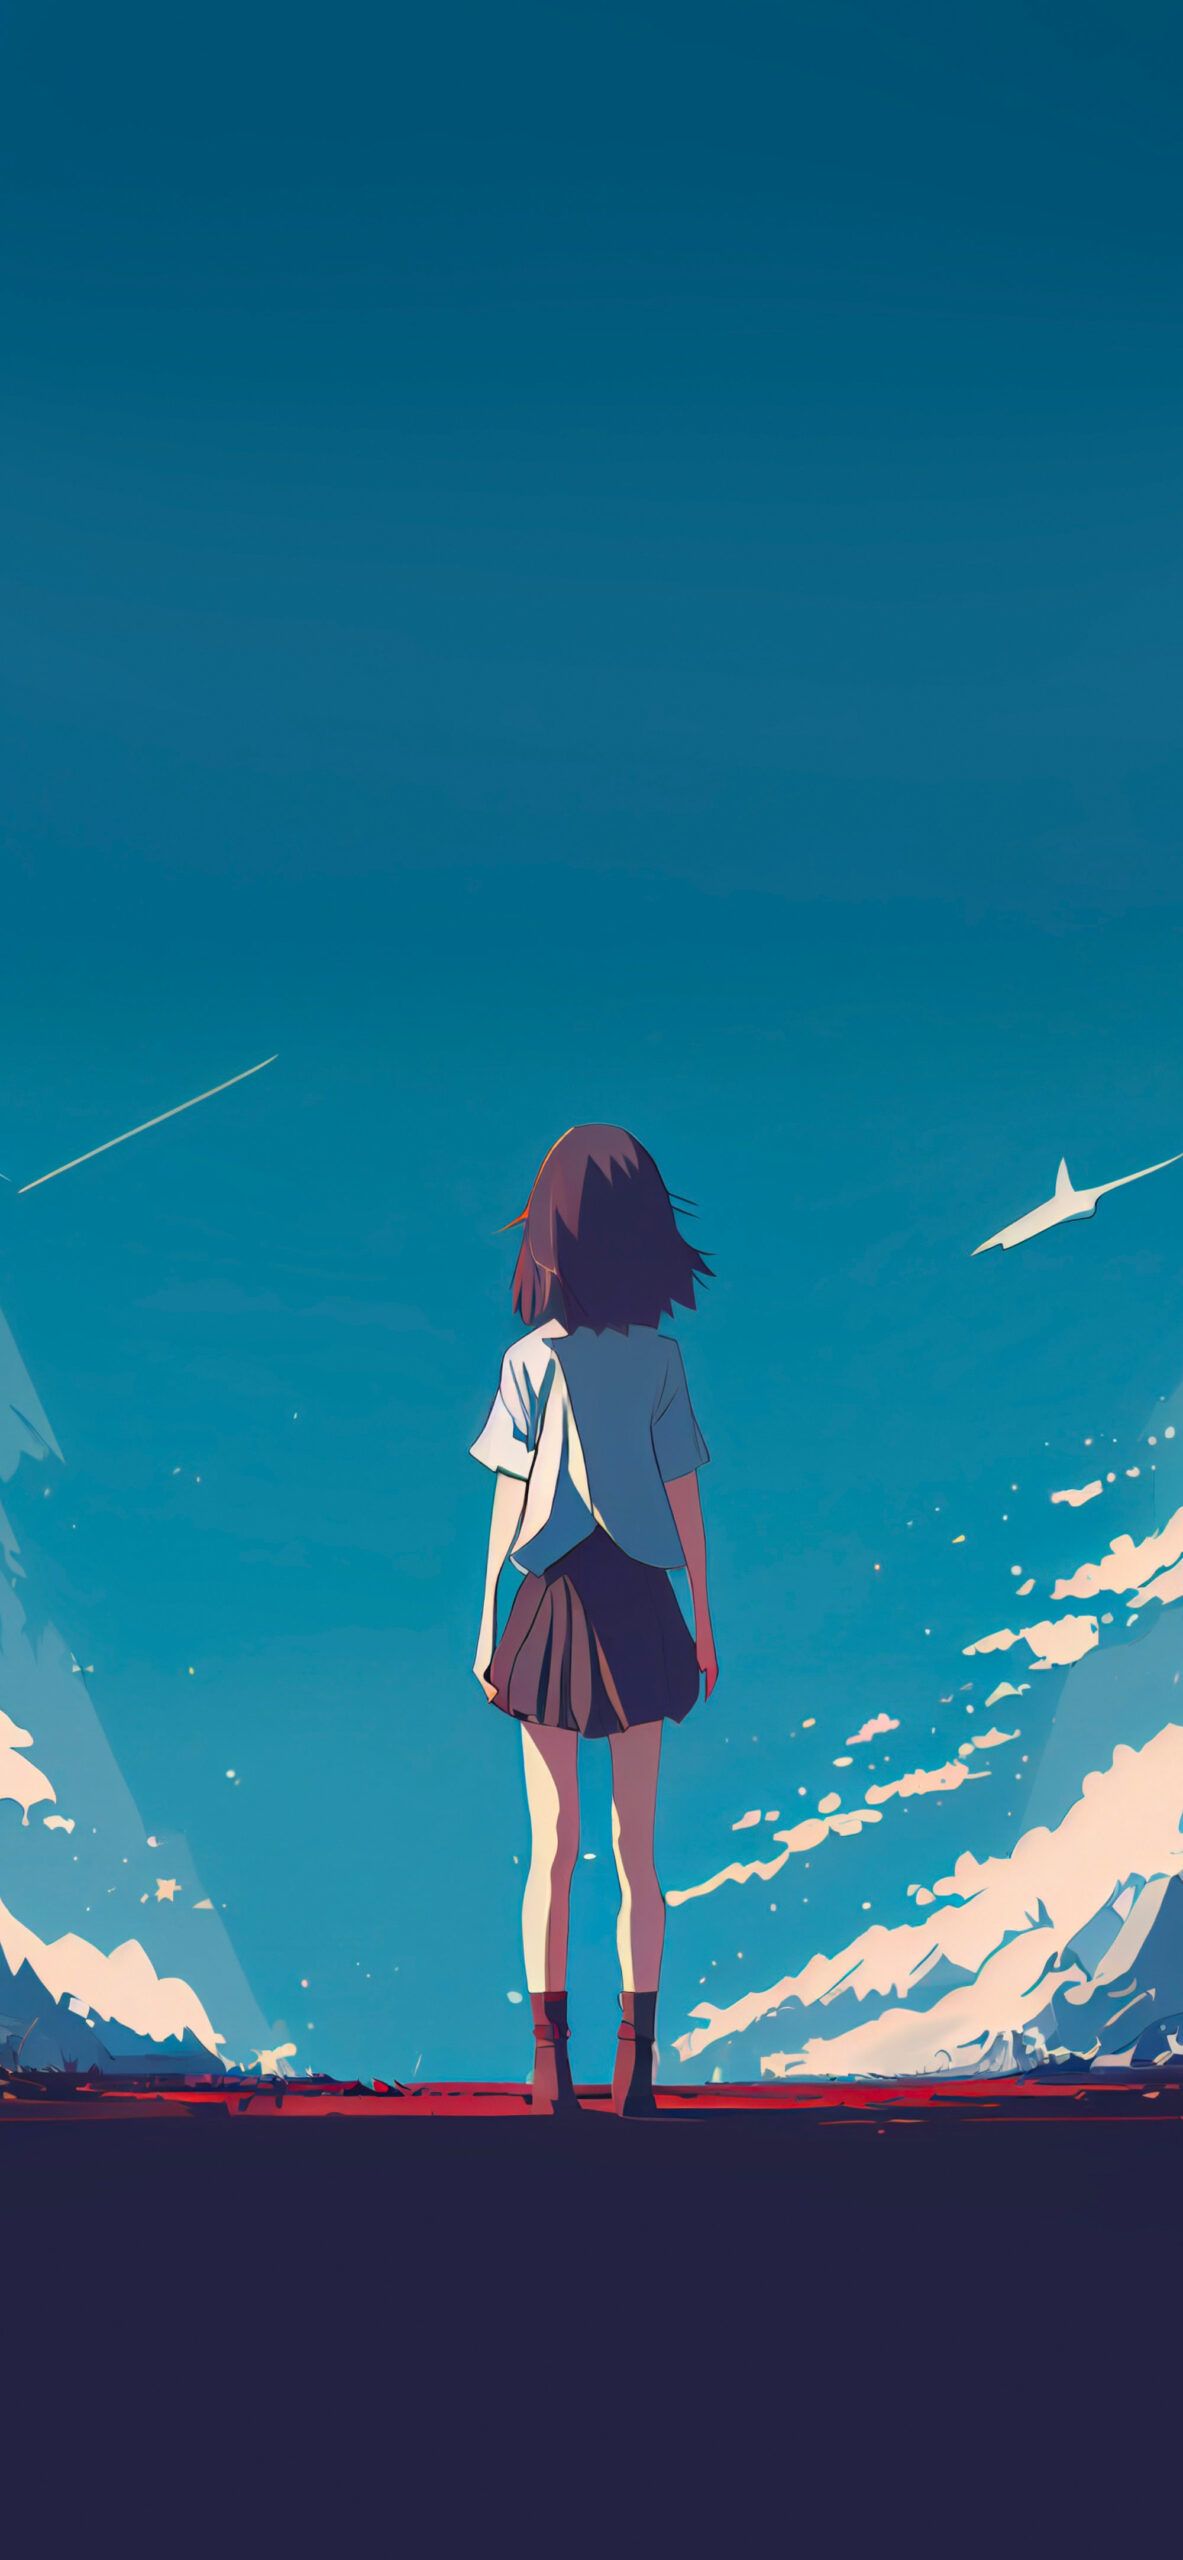 A girl standing on the side of an airport - Anime girl, sky, anime